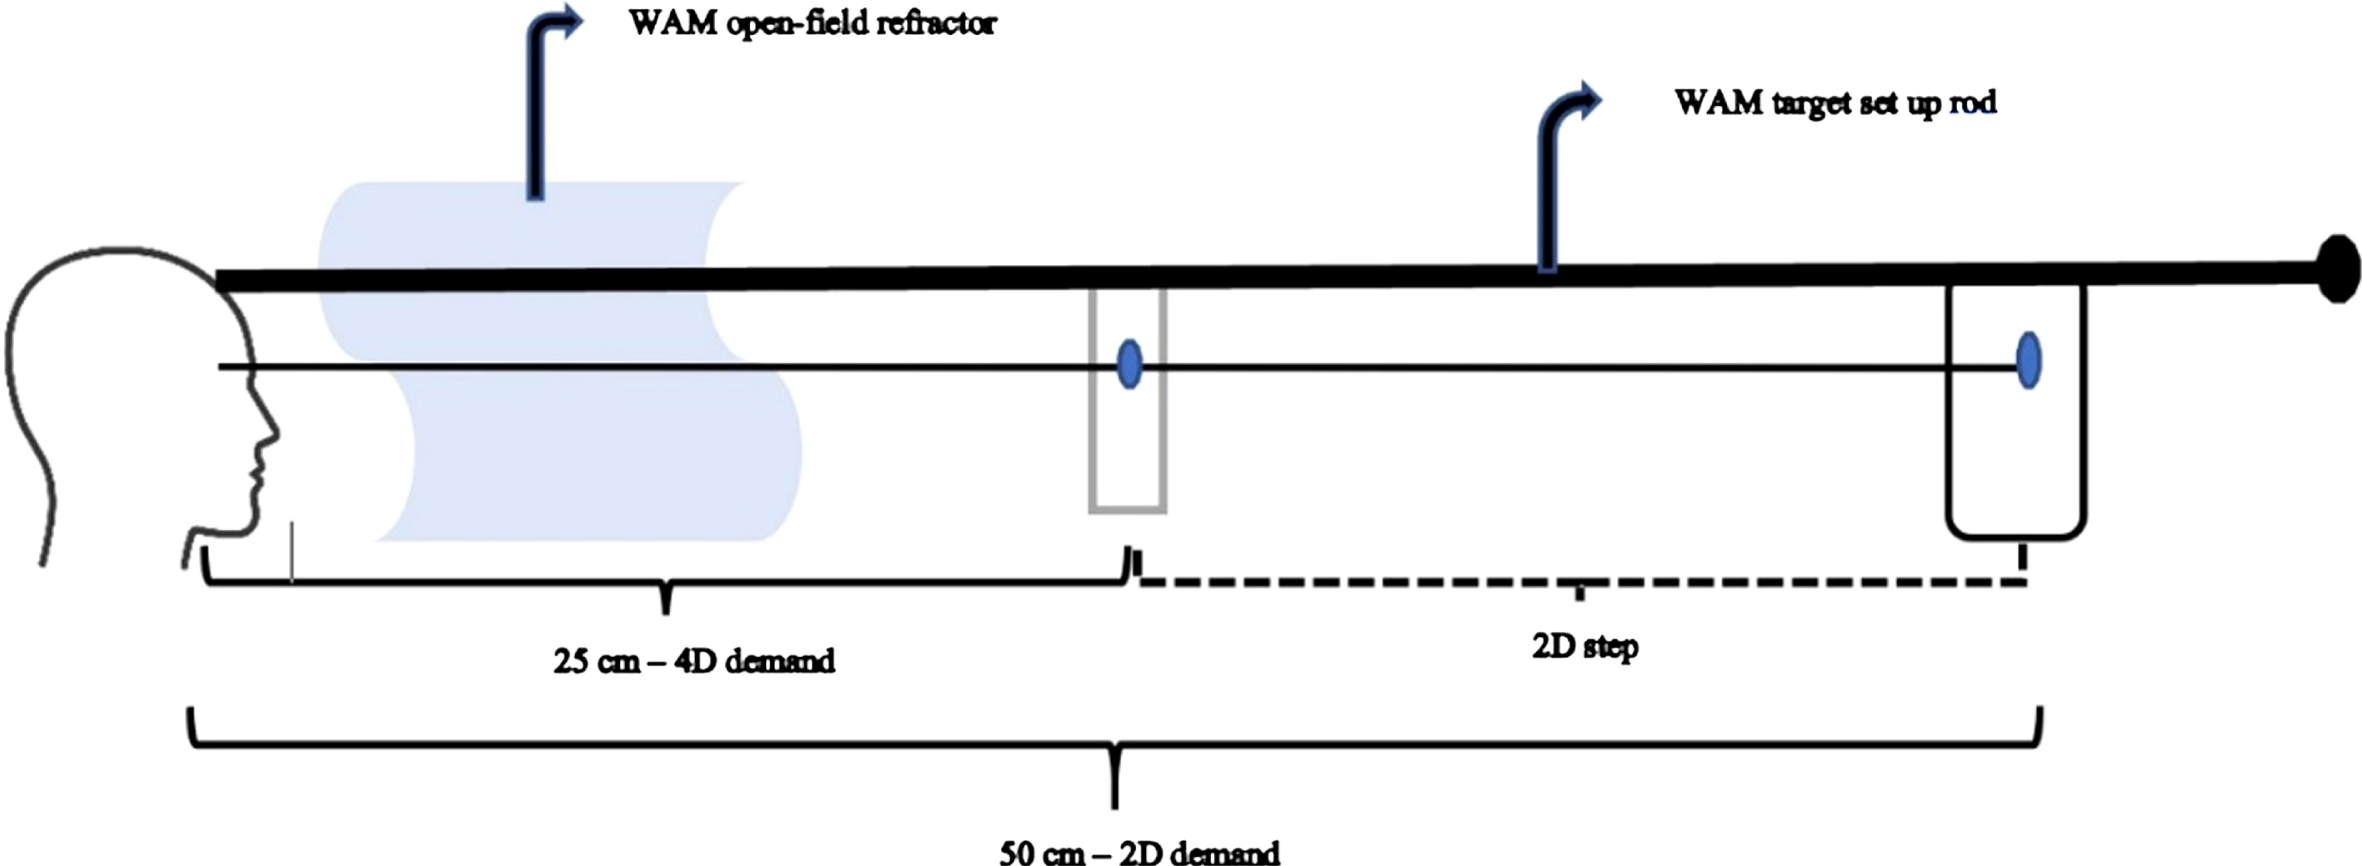 target arrangement with WAM 5500 autorefractor used for measuring accommodative dynamics for 2D step (increasing and decreasing) responses. Subjects switched their monocular focus between the 50cm (2D) and 25cm (4D) targets upon examiner’s verbal instruction in an increasing (50cm to 25cm) and decreasing (25cm to 50cm) step manner.